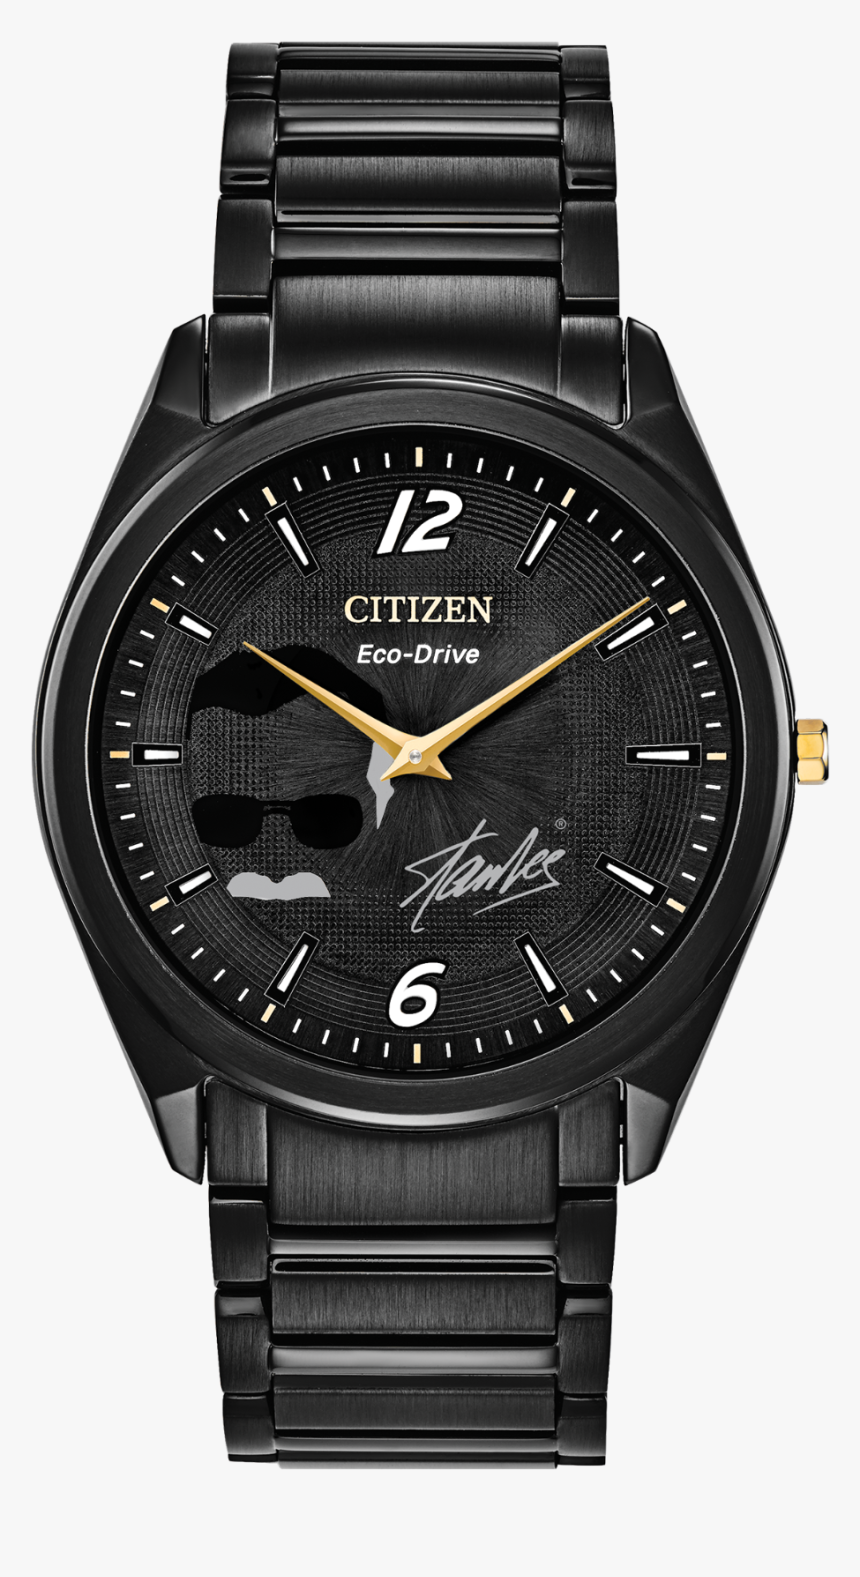 Stan Lee Main View - Stan Lee Citizen Watch, HD Png Download, Free Download